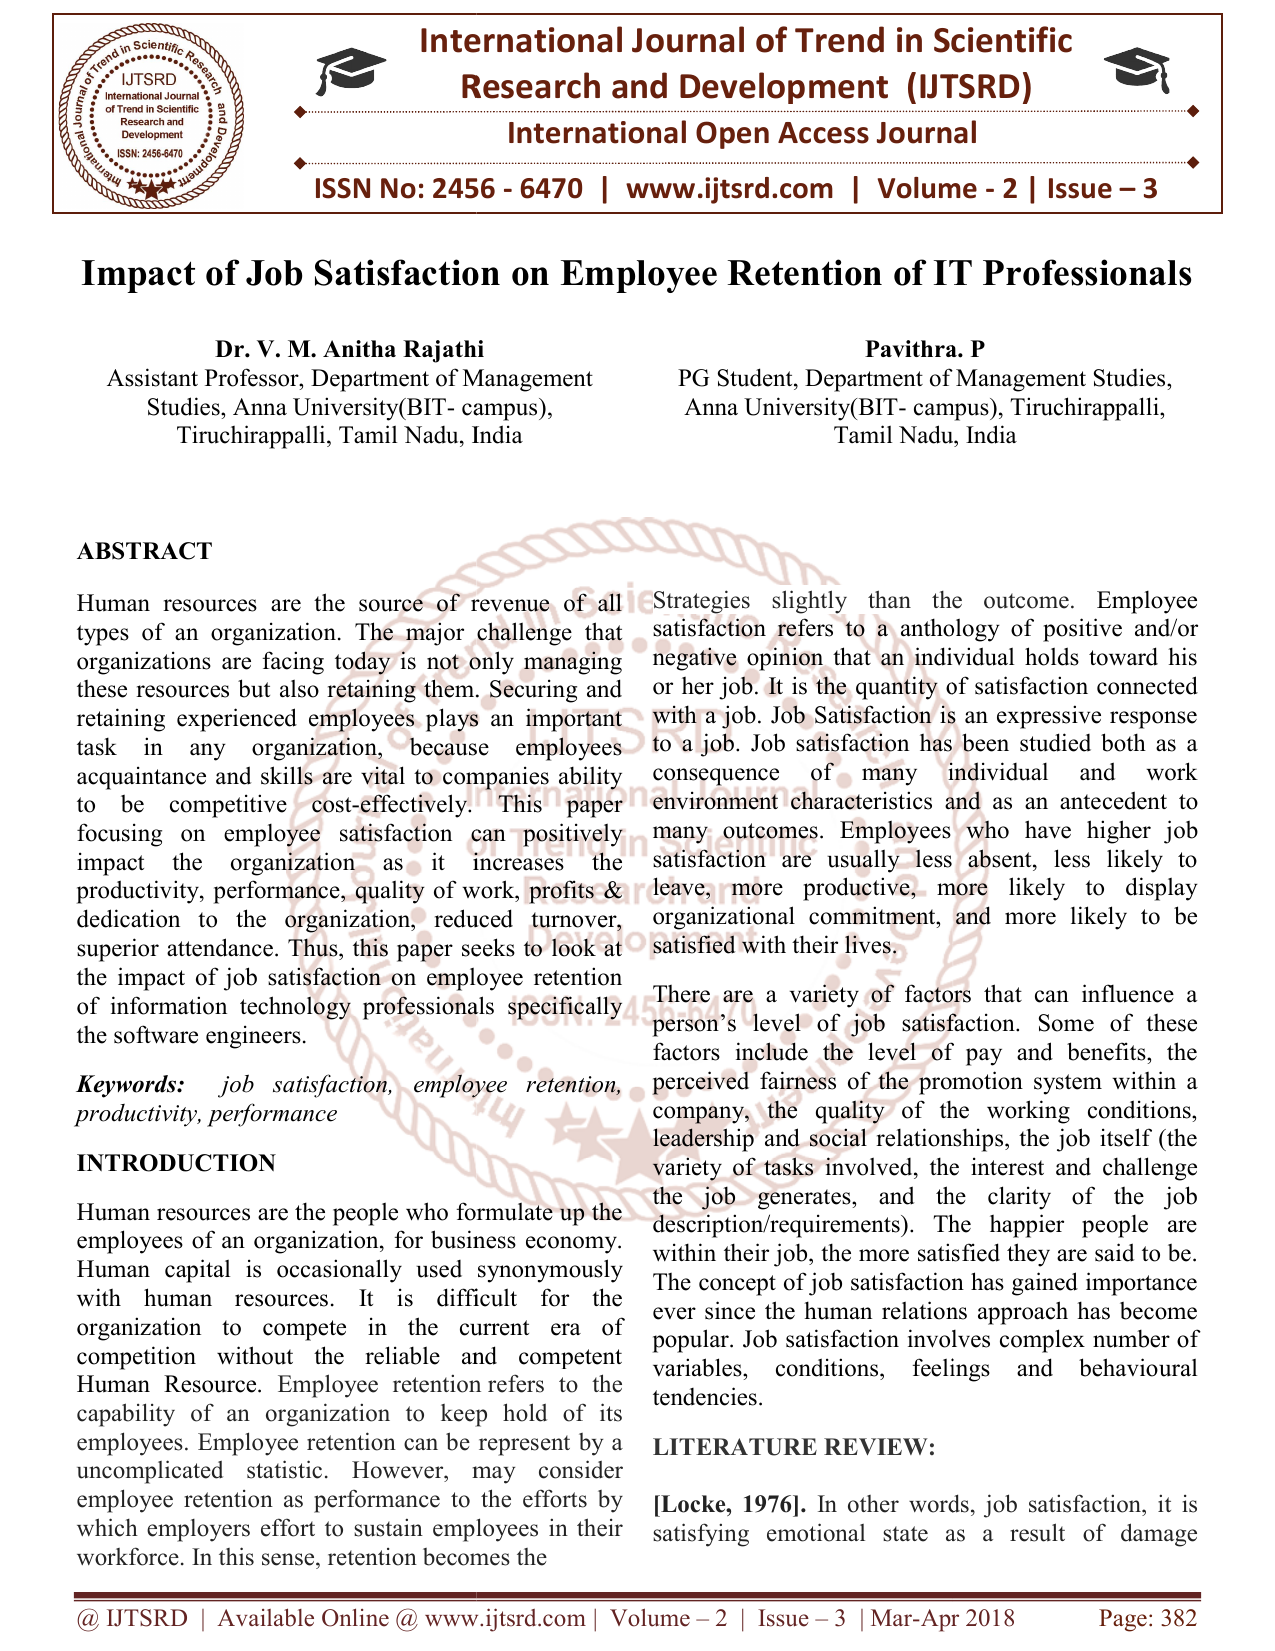 employee productivity literature review